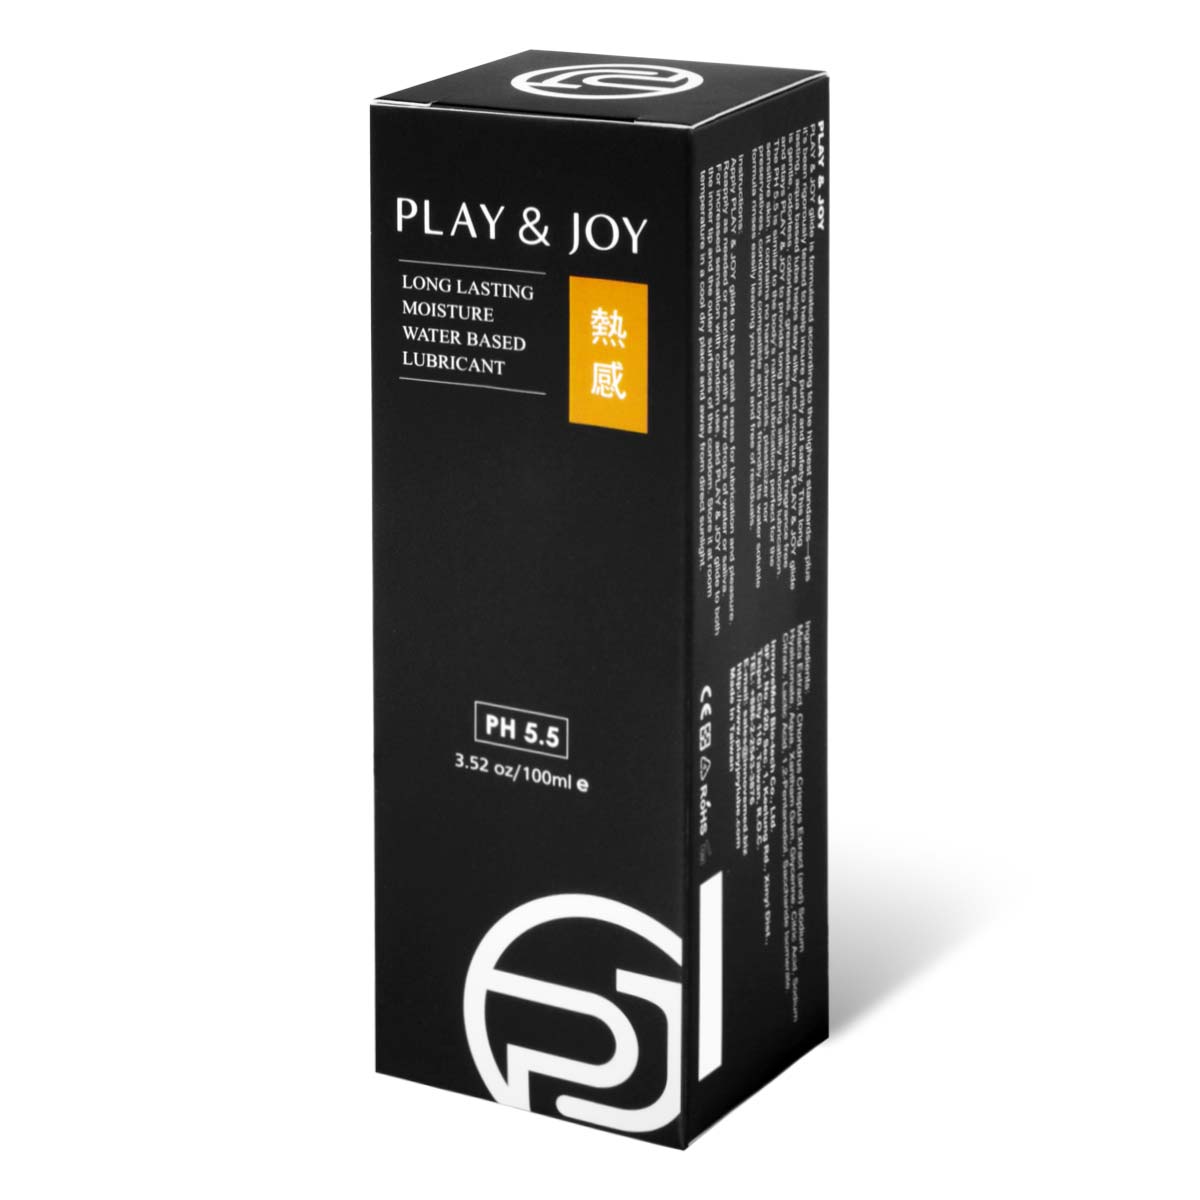 PLAY & JOY Hot & Sexy 100ml Water-based Lubricant-p_1